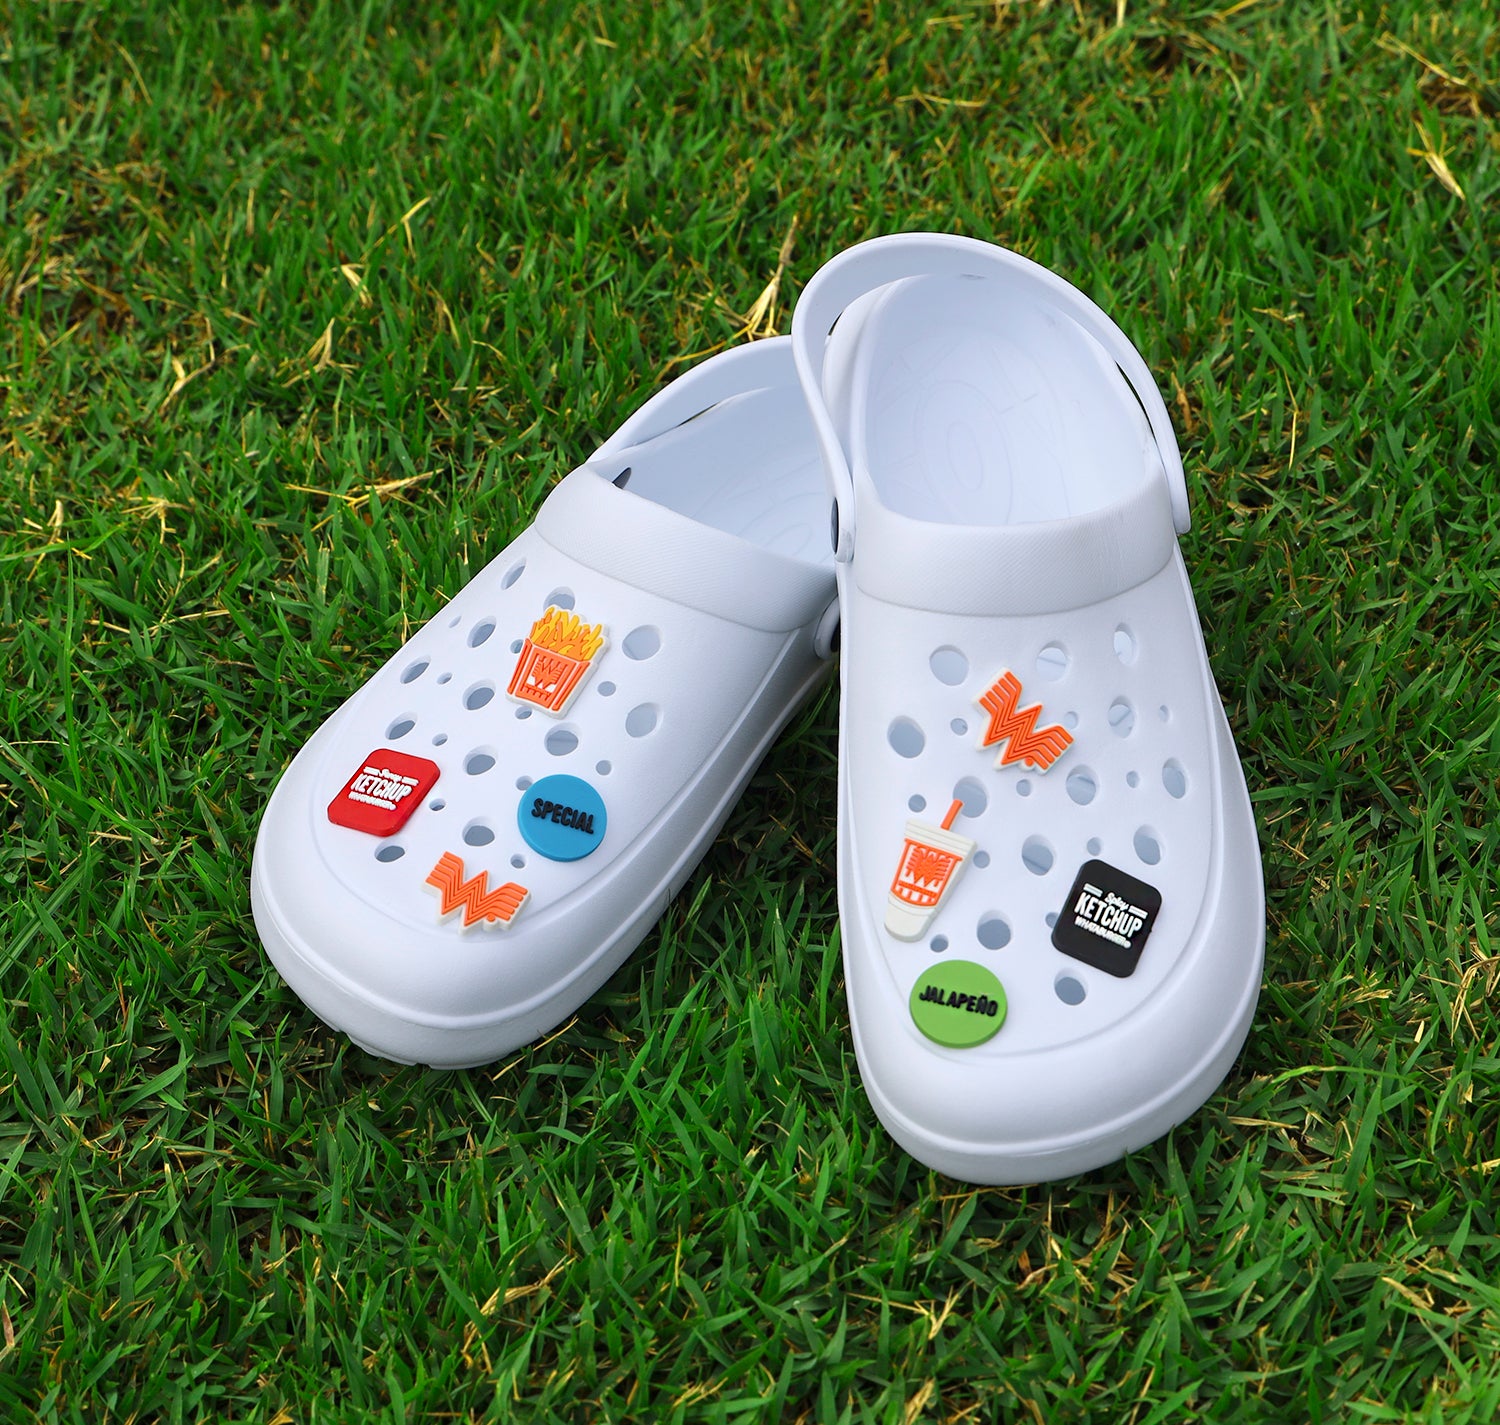 Crocs+Jibbitz+Charms+Collection+Case+-+includes+19+charms+-+Holds+